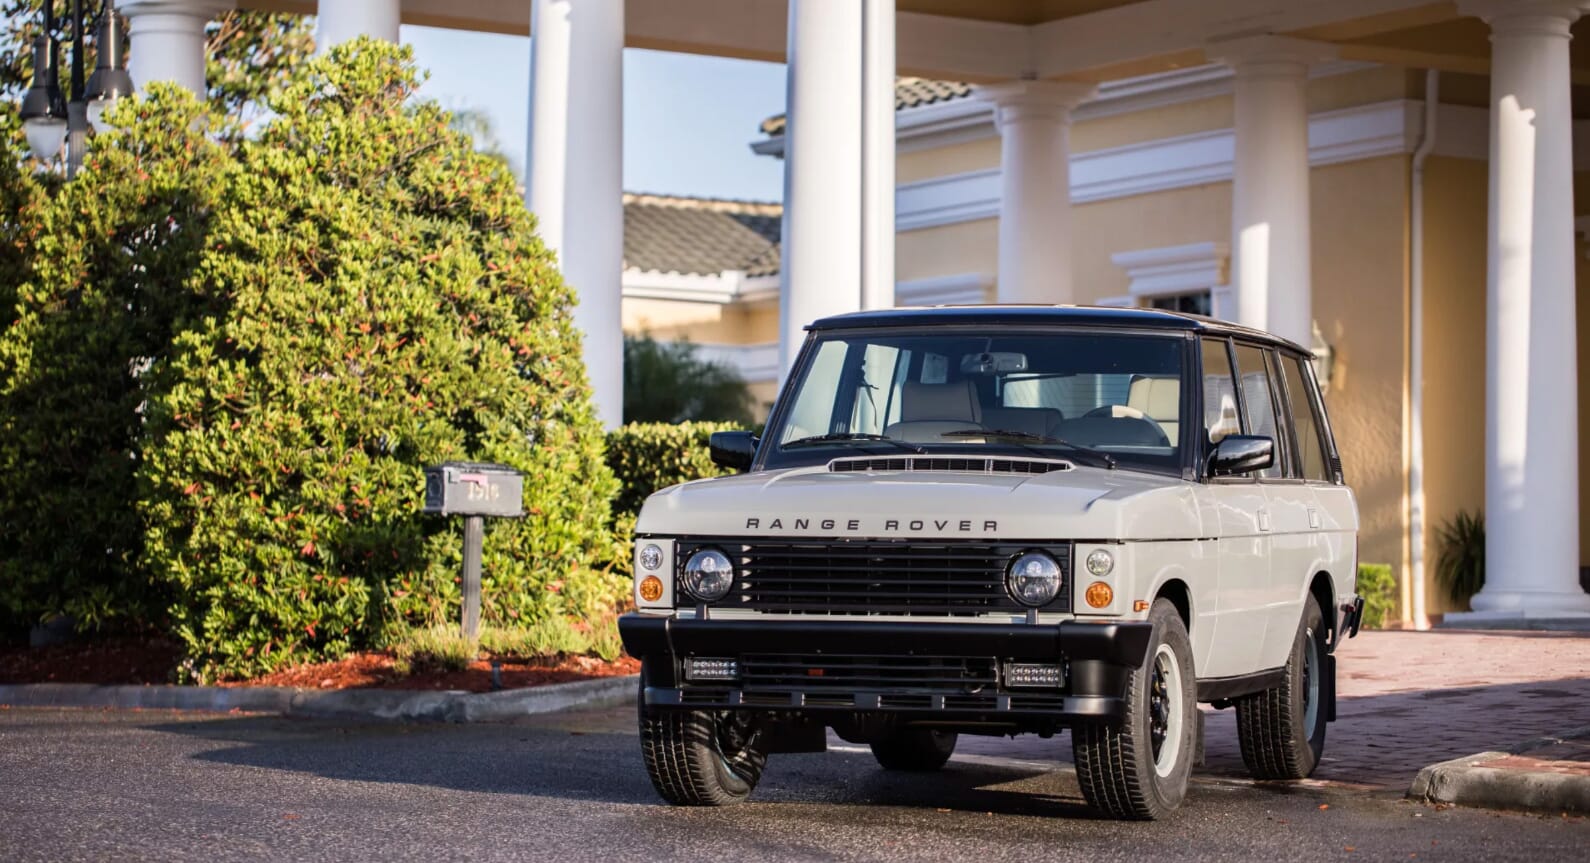 East Coast Defender Introduces The Range Rover Classic Project Alpha